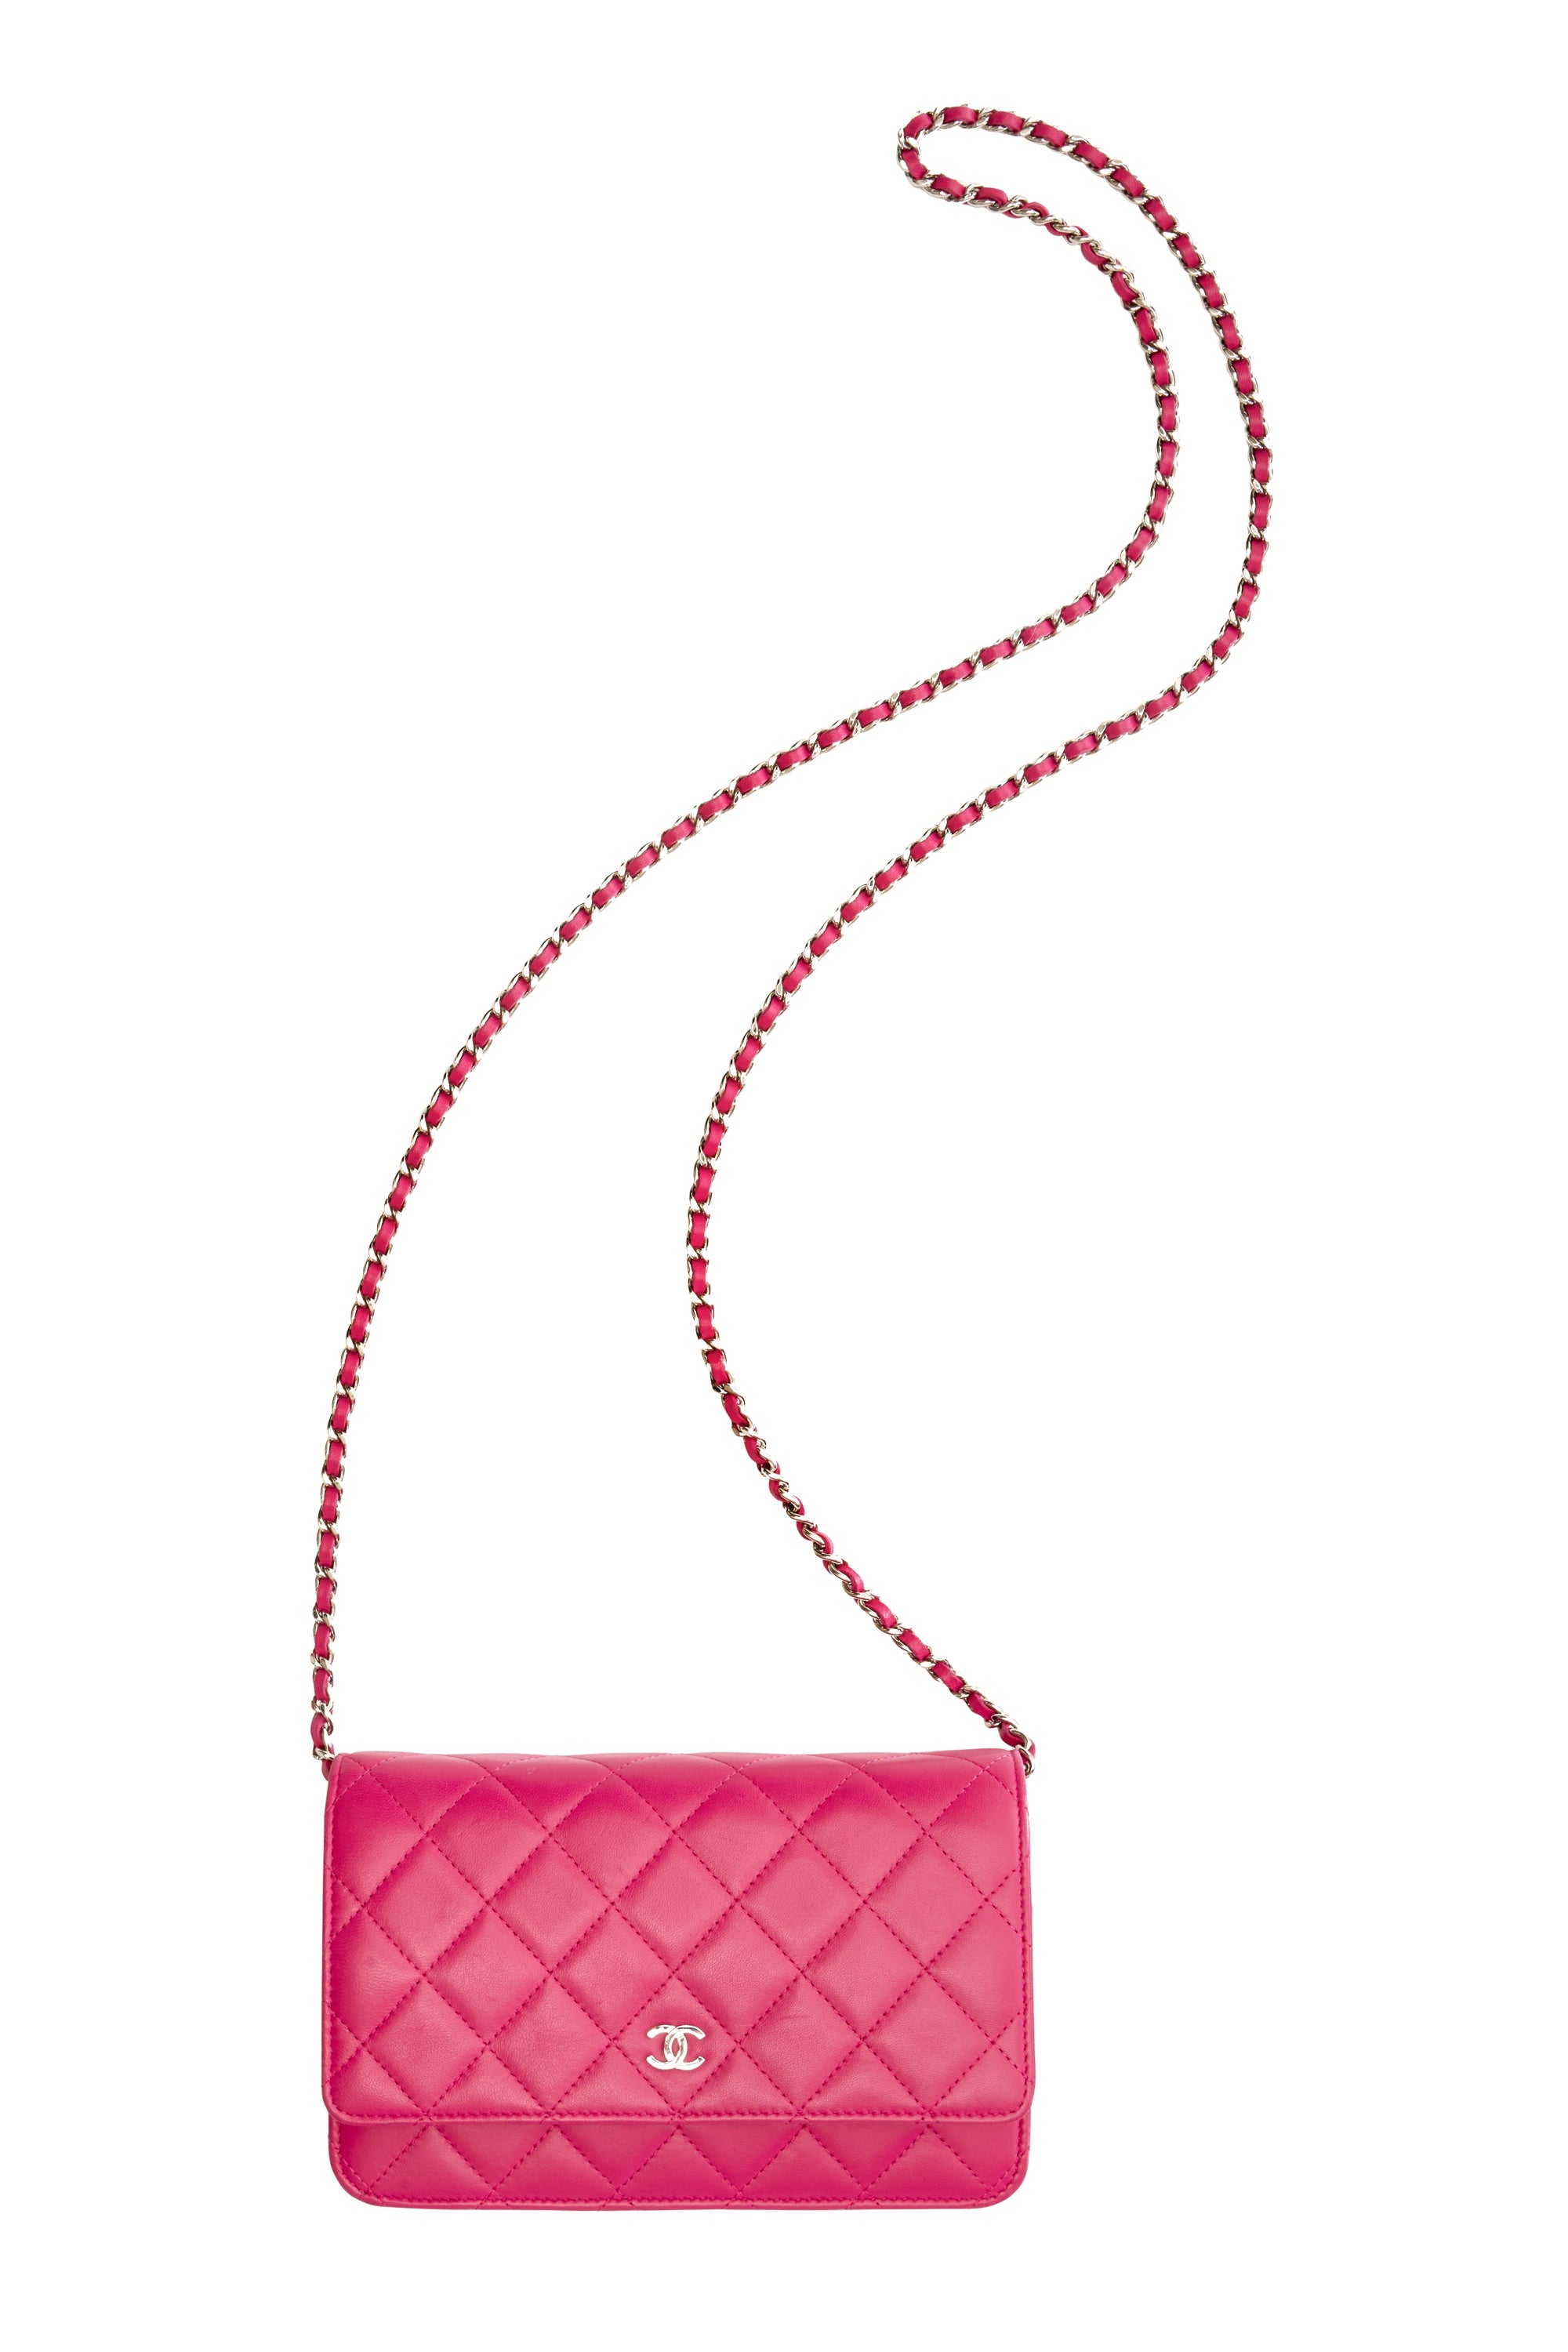 Chanel Pink Quilted Wallet on a Chain 2014